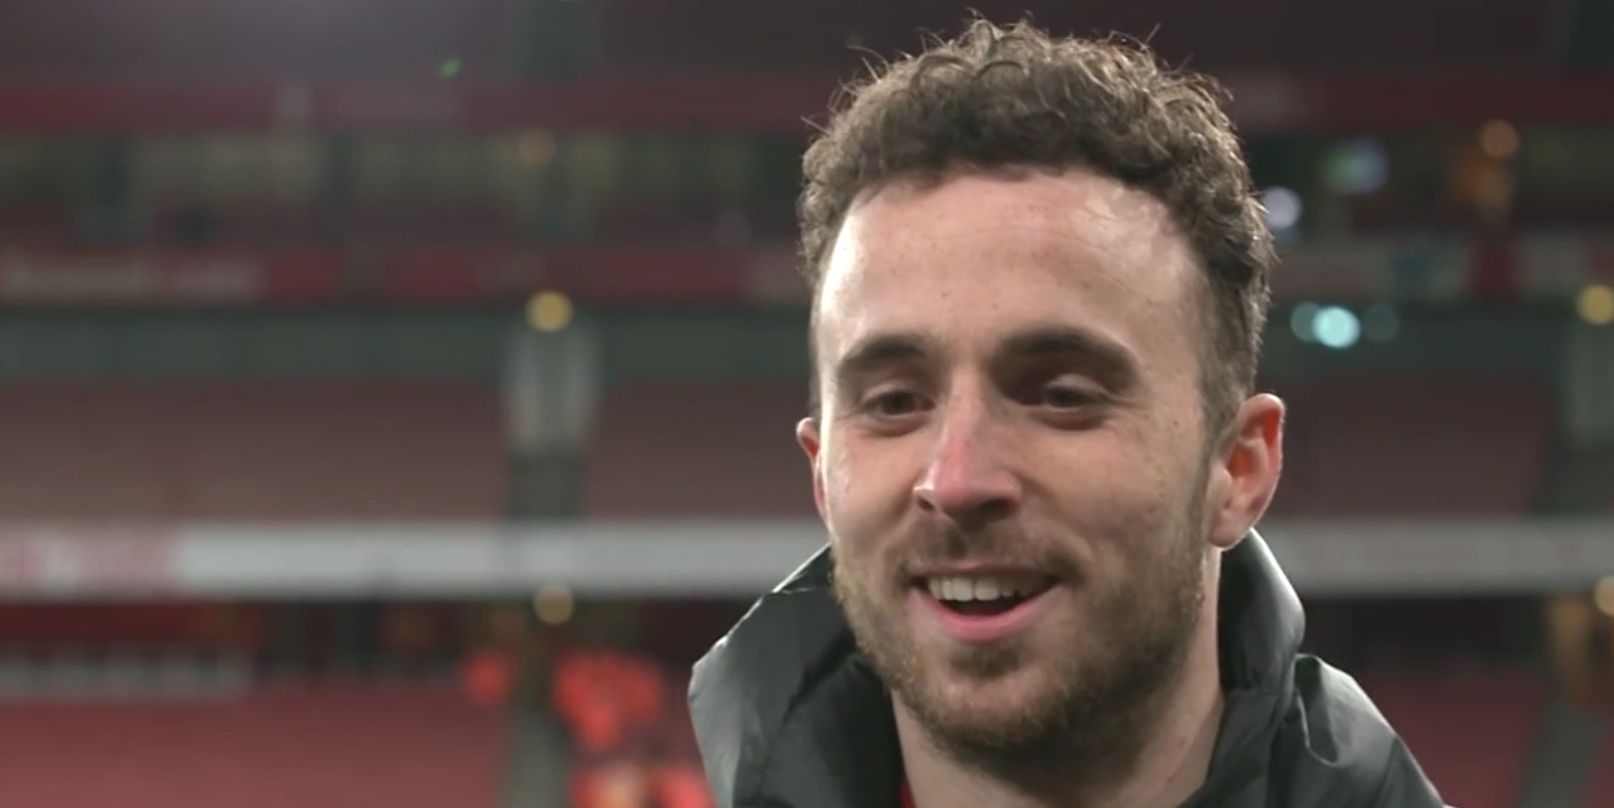 ‘Nine games, nine finals, I believe we can do it’ – Diogo Jota’s rally call to the rest of the Liverpool squad